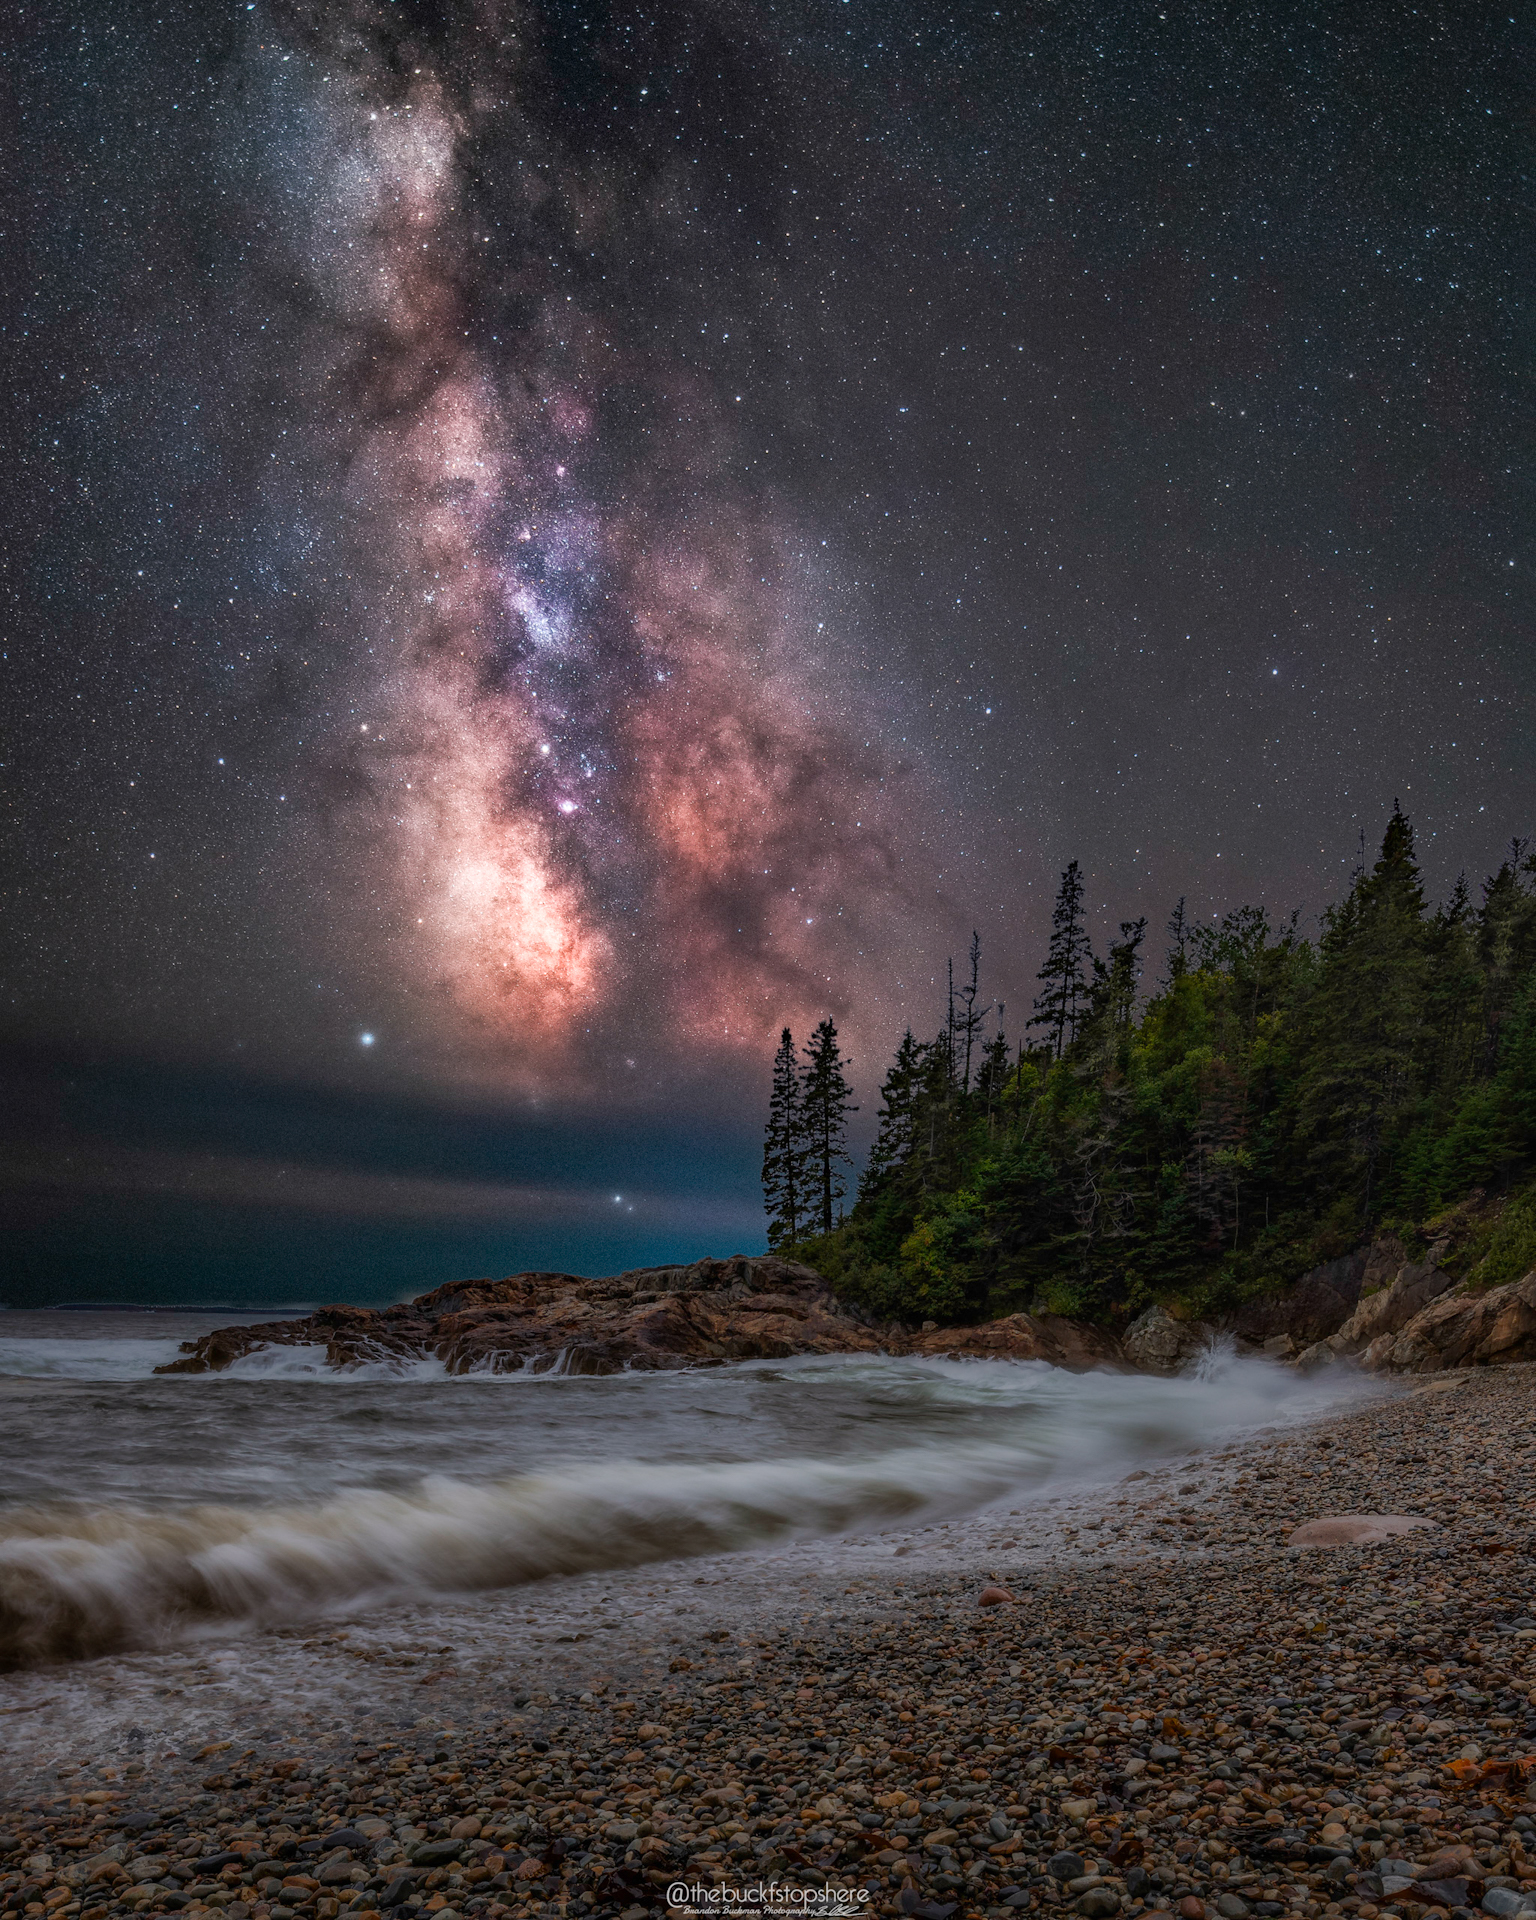 How to start a photography business by popular New England photographer, Shannon Shipman: image of a New England beach with the milky way galaxy in the sky. 